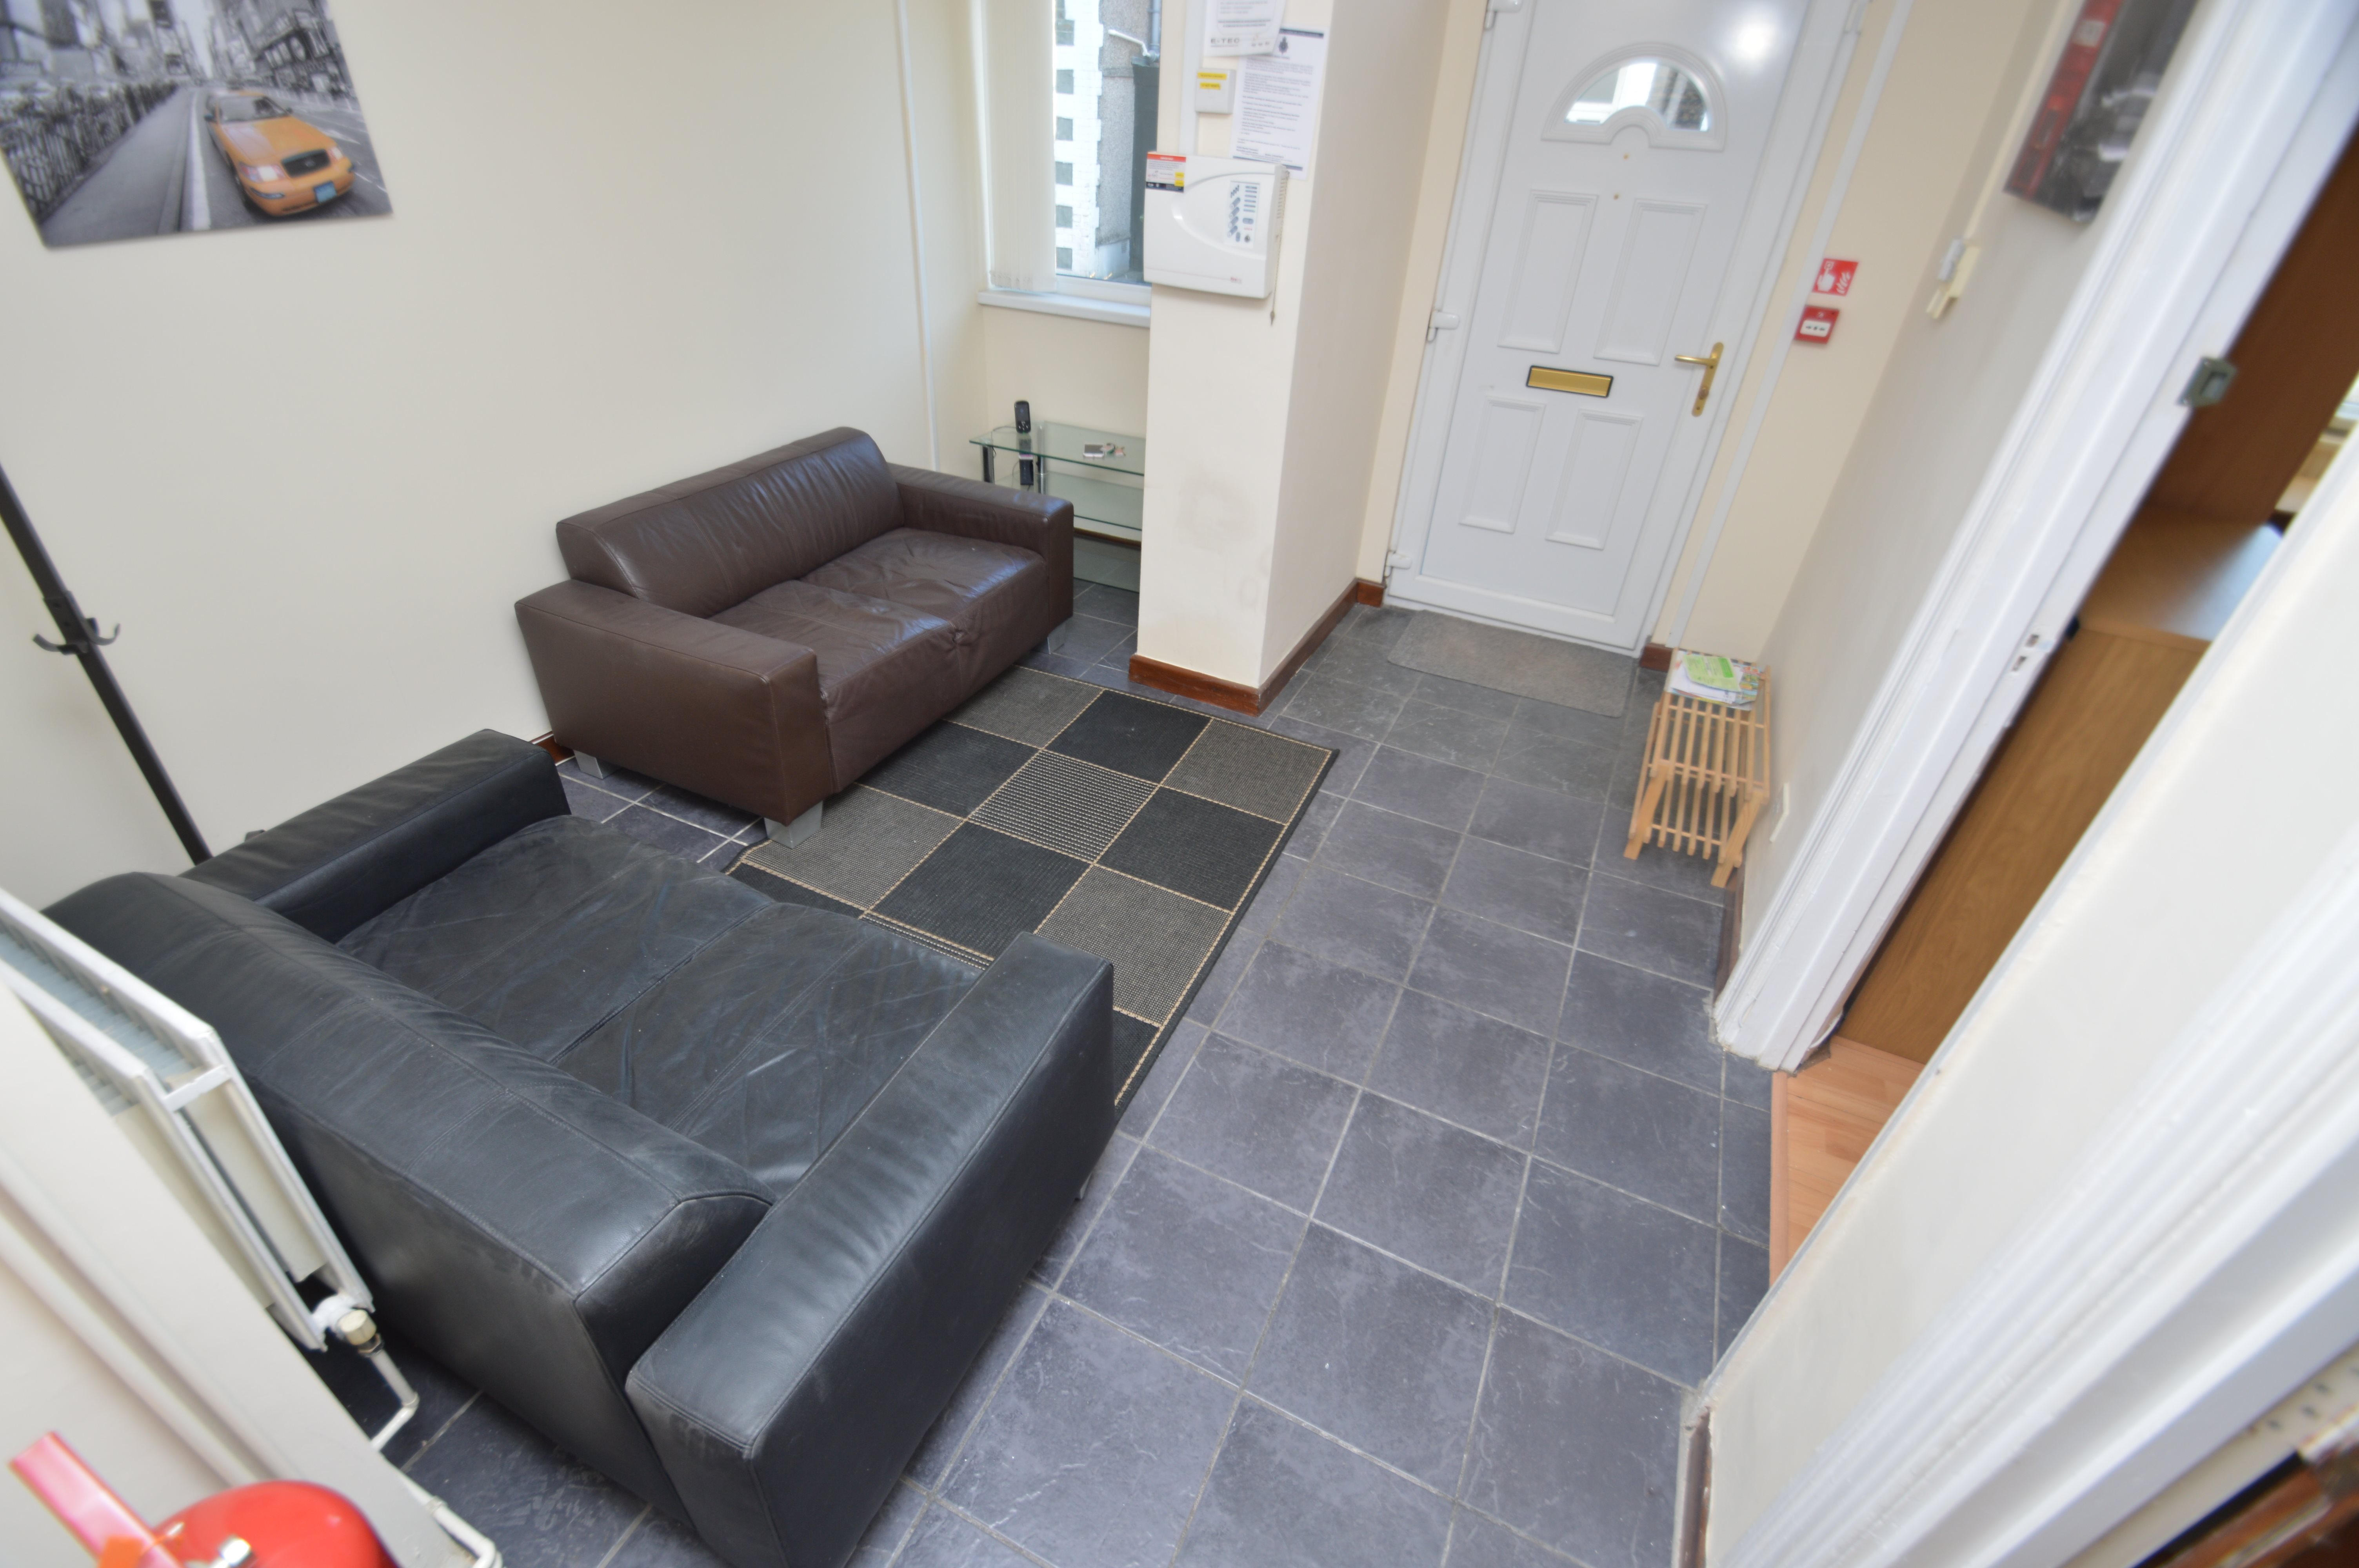 1 bed house / flat share to rent in Wood Road, Treforest 1